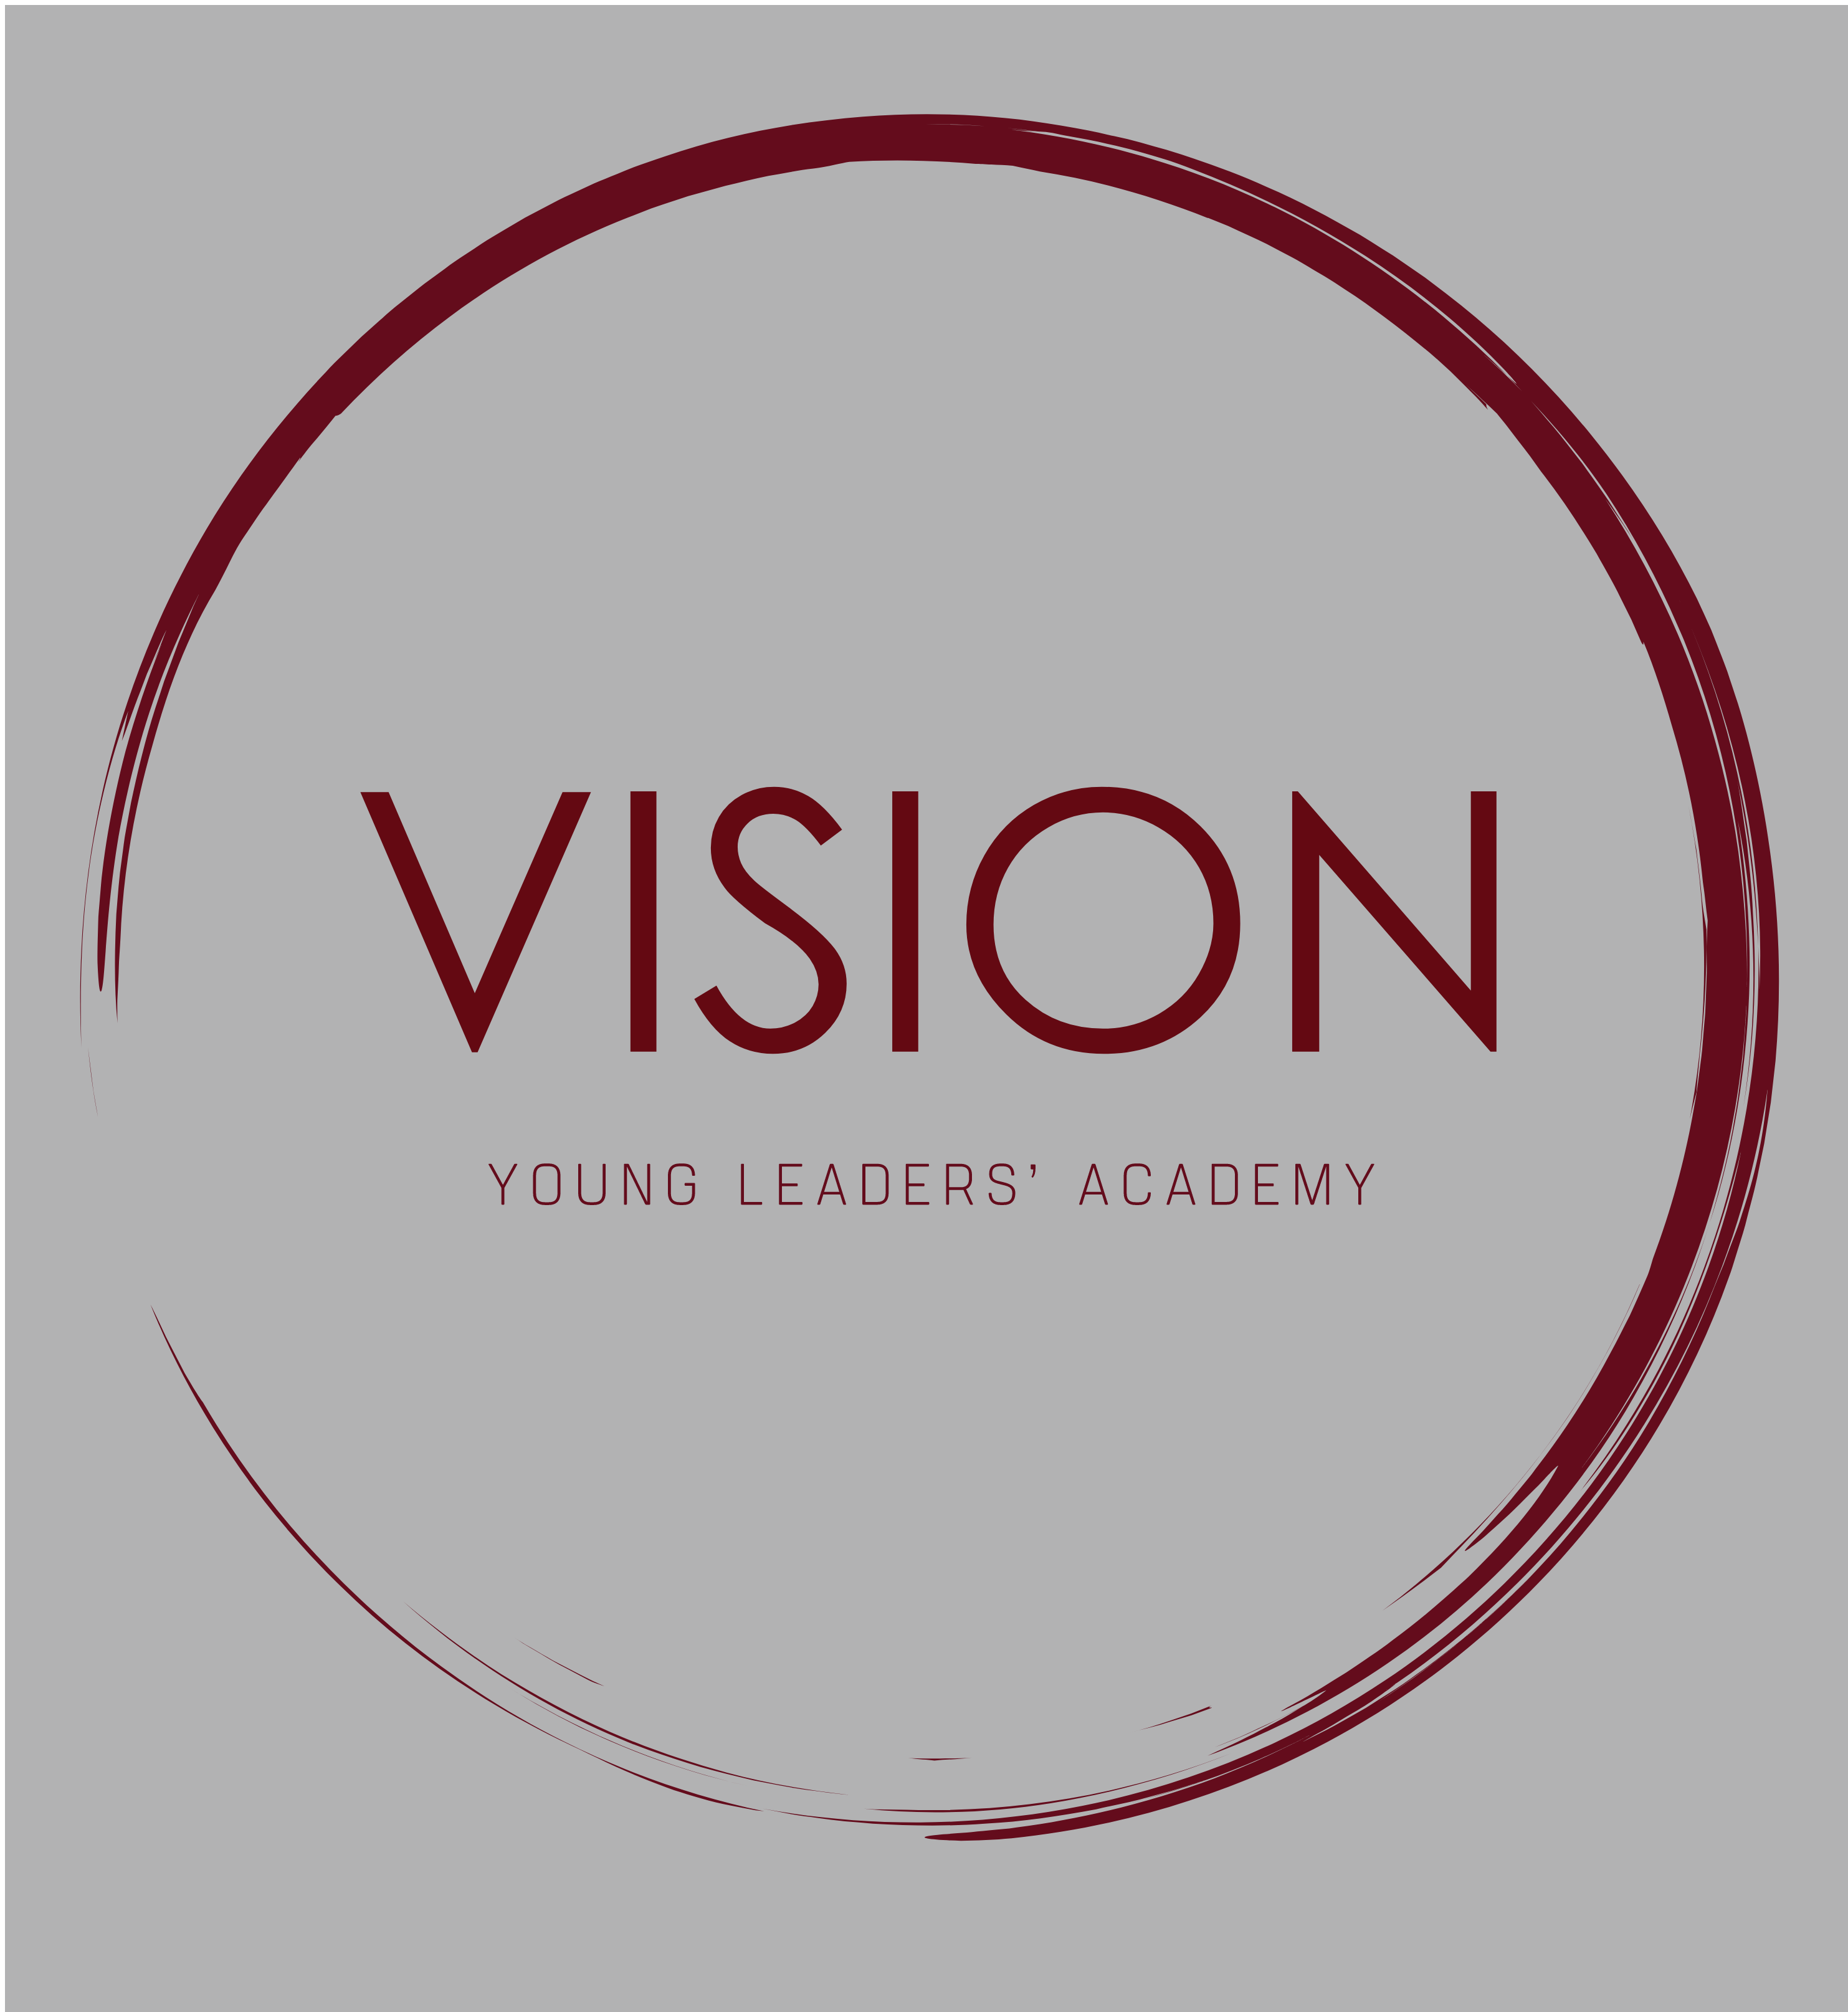 Vision Young Leaders’ Academy logo